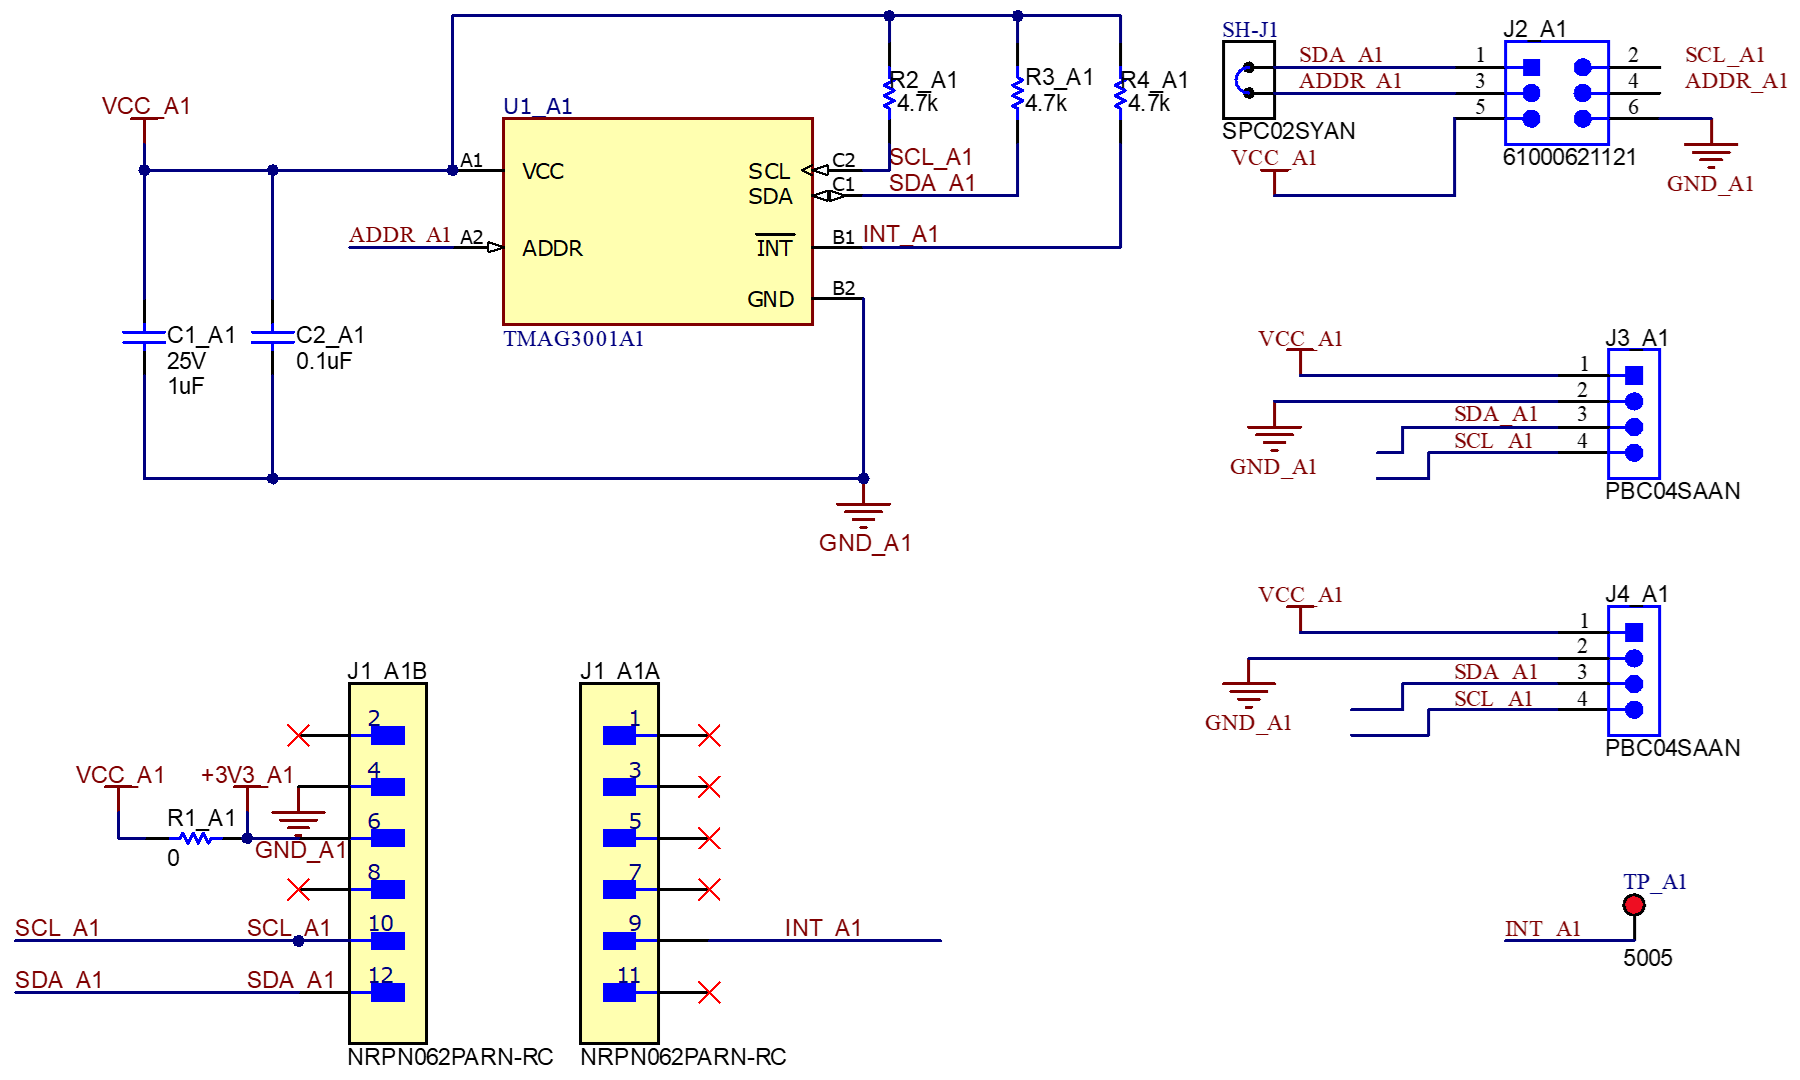 TMAG3001EVM TMAG3001A1 Part of EVM Schematic